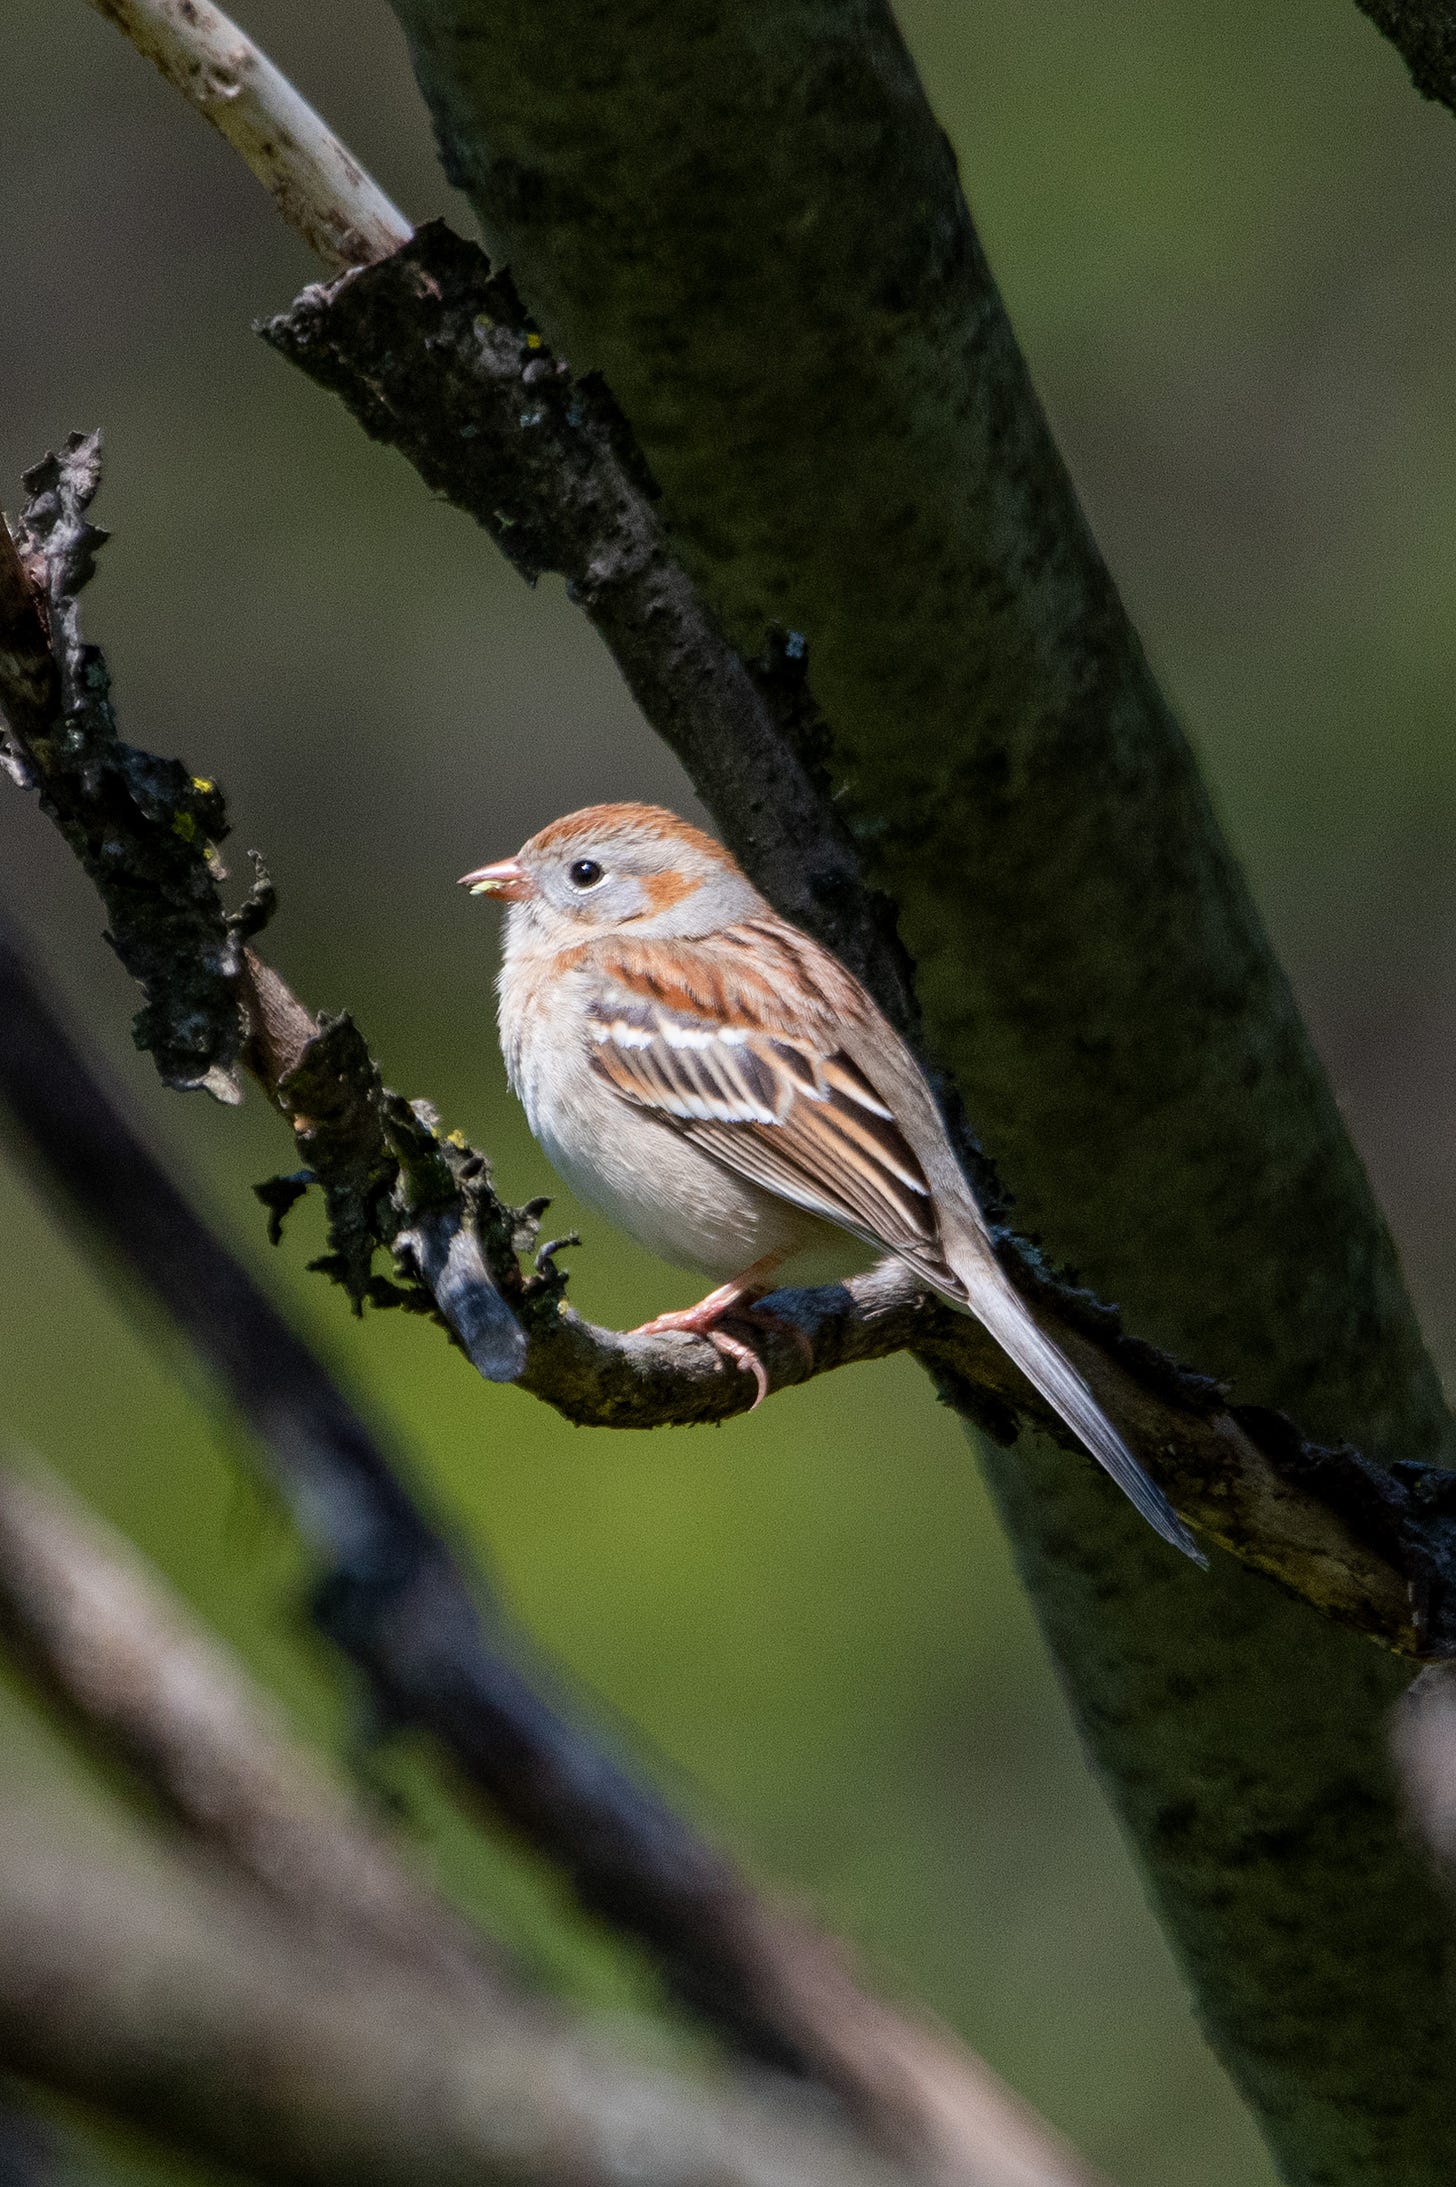 A field sparrow in profile, on a blackened and frayed branch of a sumac